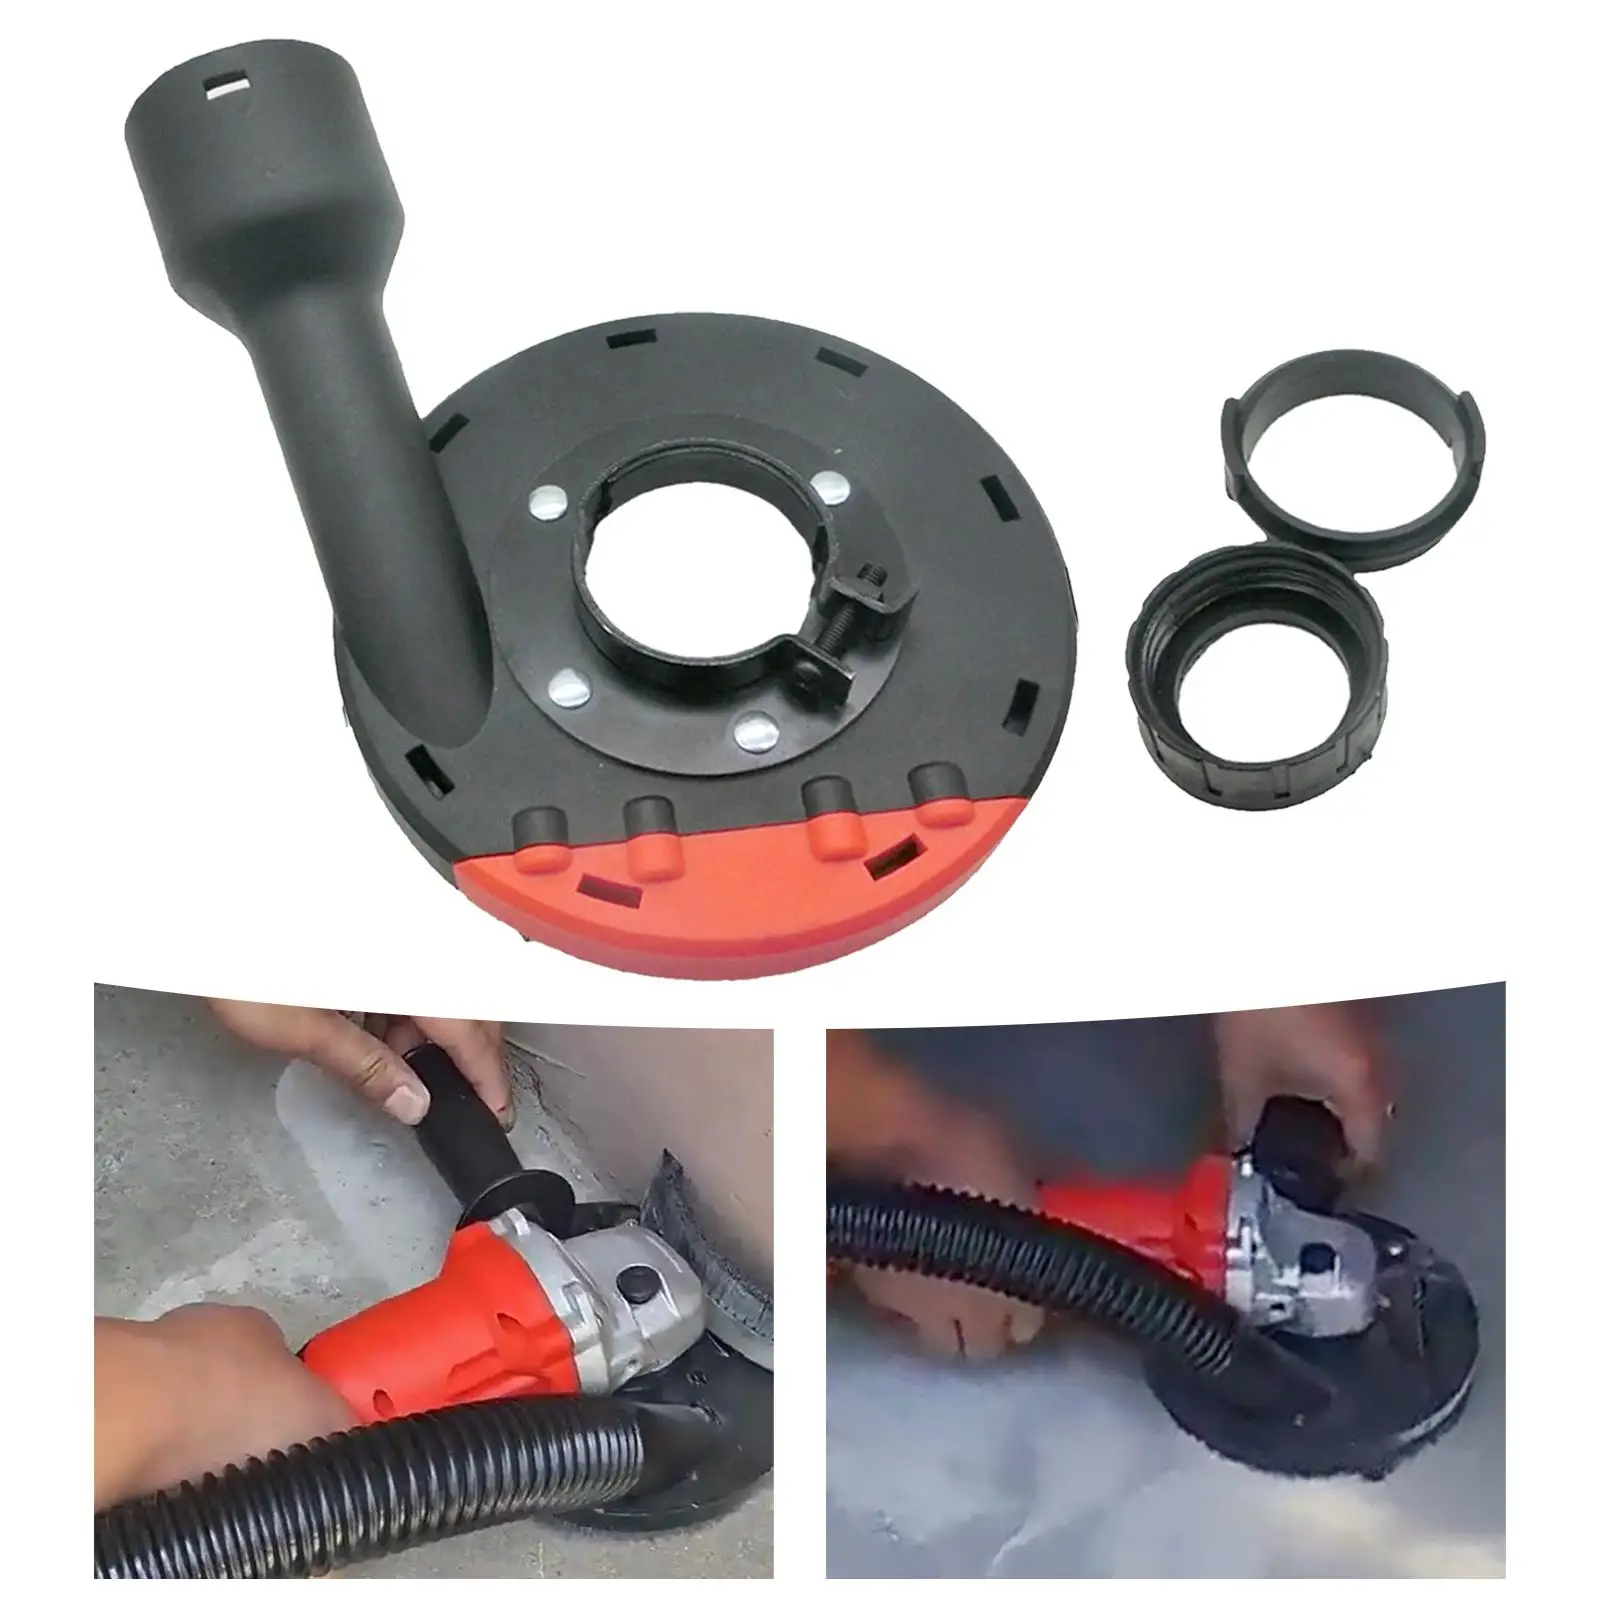 5.5 inch Grinder Dust Collector Grinder Attachments Dust Shroud for Angle Grinder Granite Concrete Stone Accessories Tools